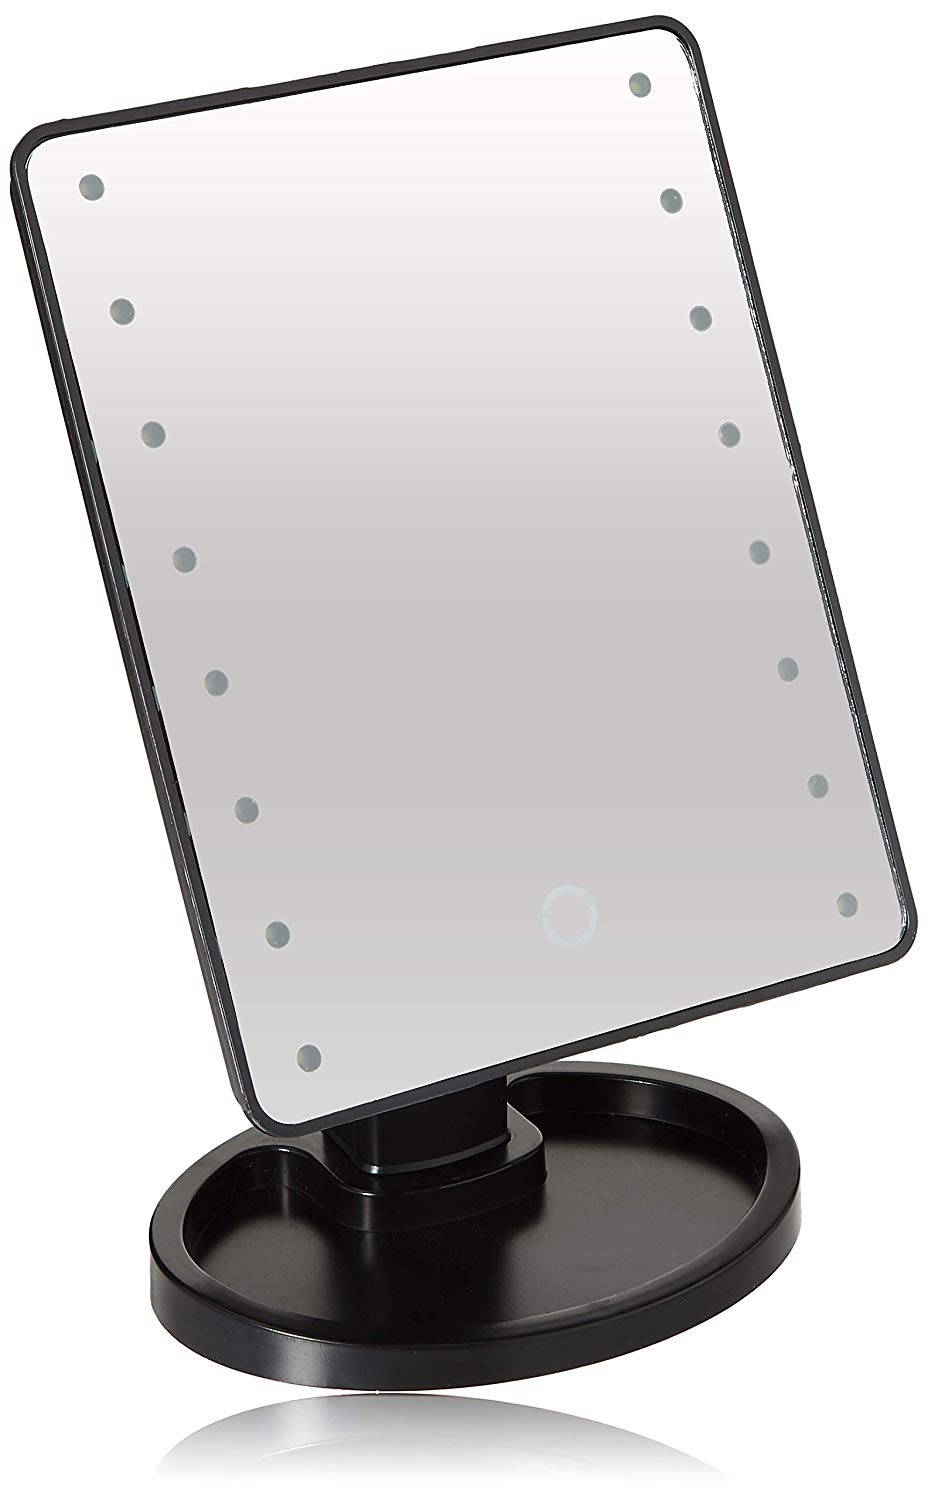 Ideaworks Light Up Mirror Large 16 LED Lights Rotating Mirror Magnifier Tray Battery Powered